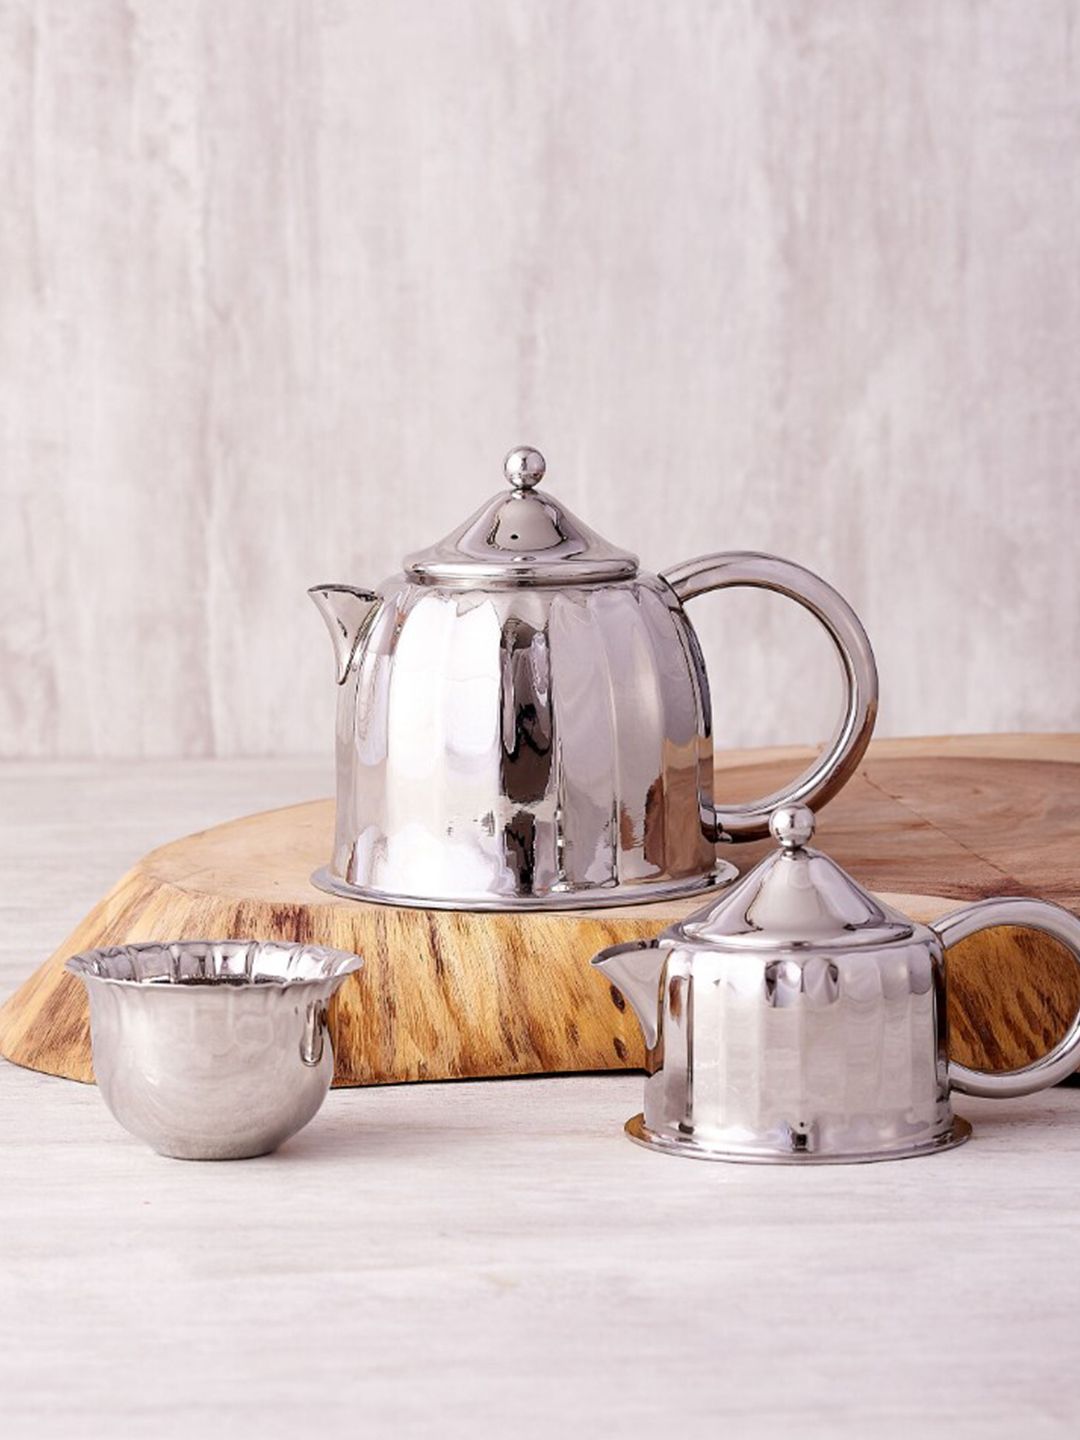 ARTTDINOX Steel Solid Stainless Steel Glossy Dome Kettle Set of Cups and Mugs Price in India